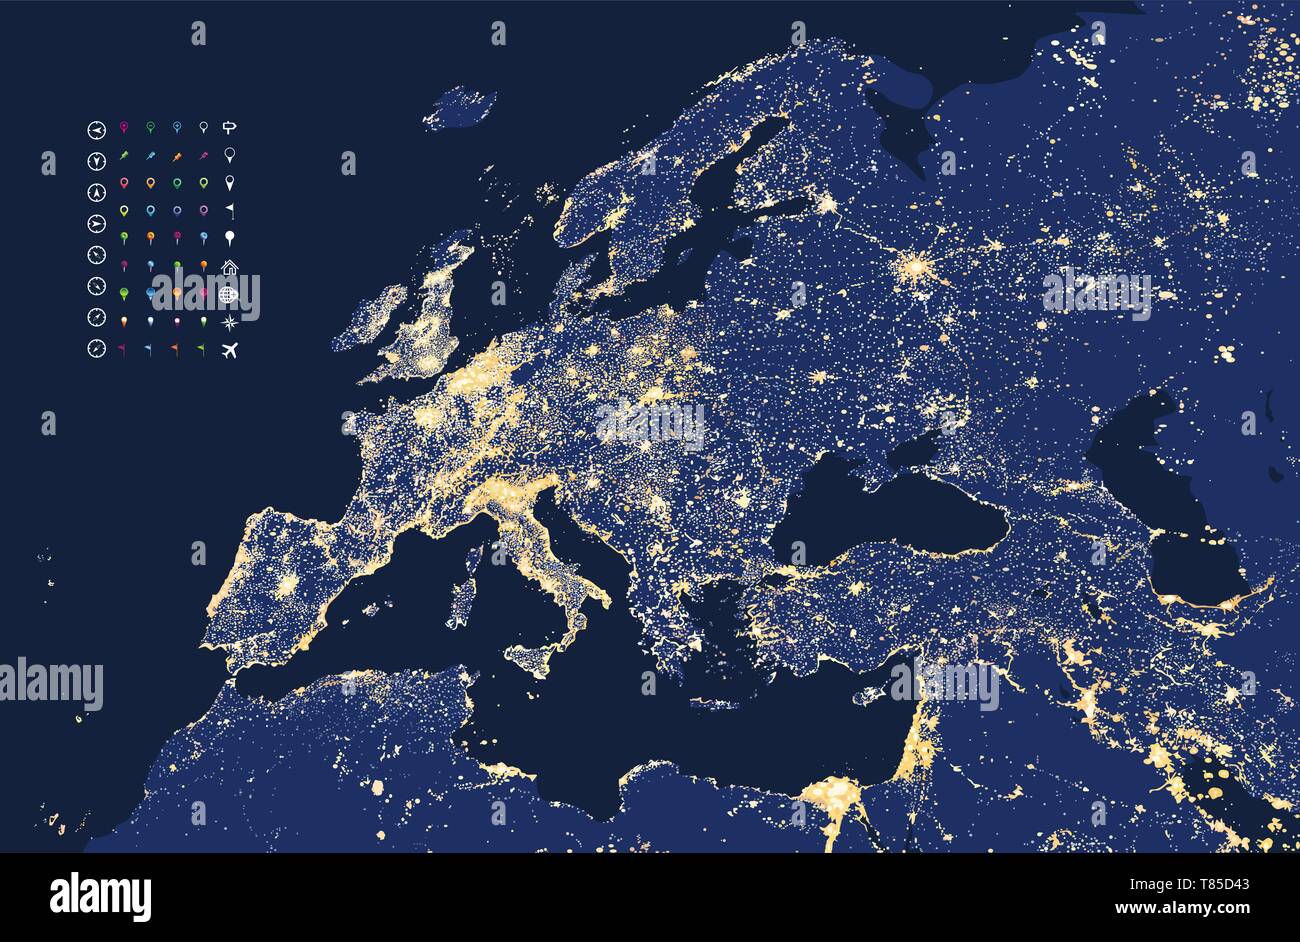 vector illustration of Europe city lights map Stock Vector